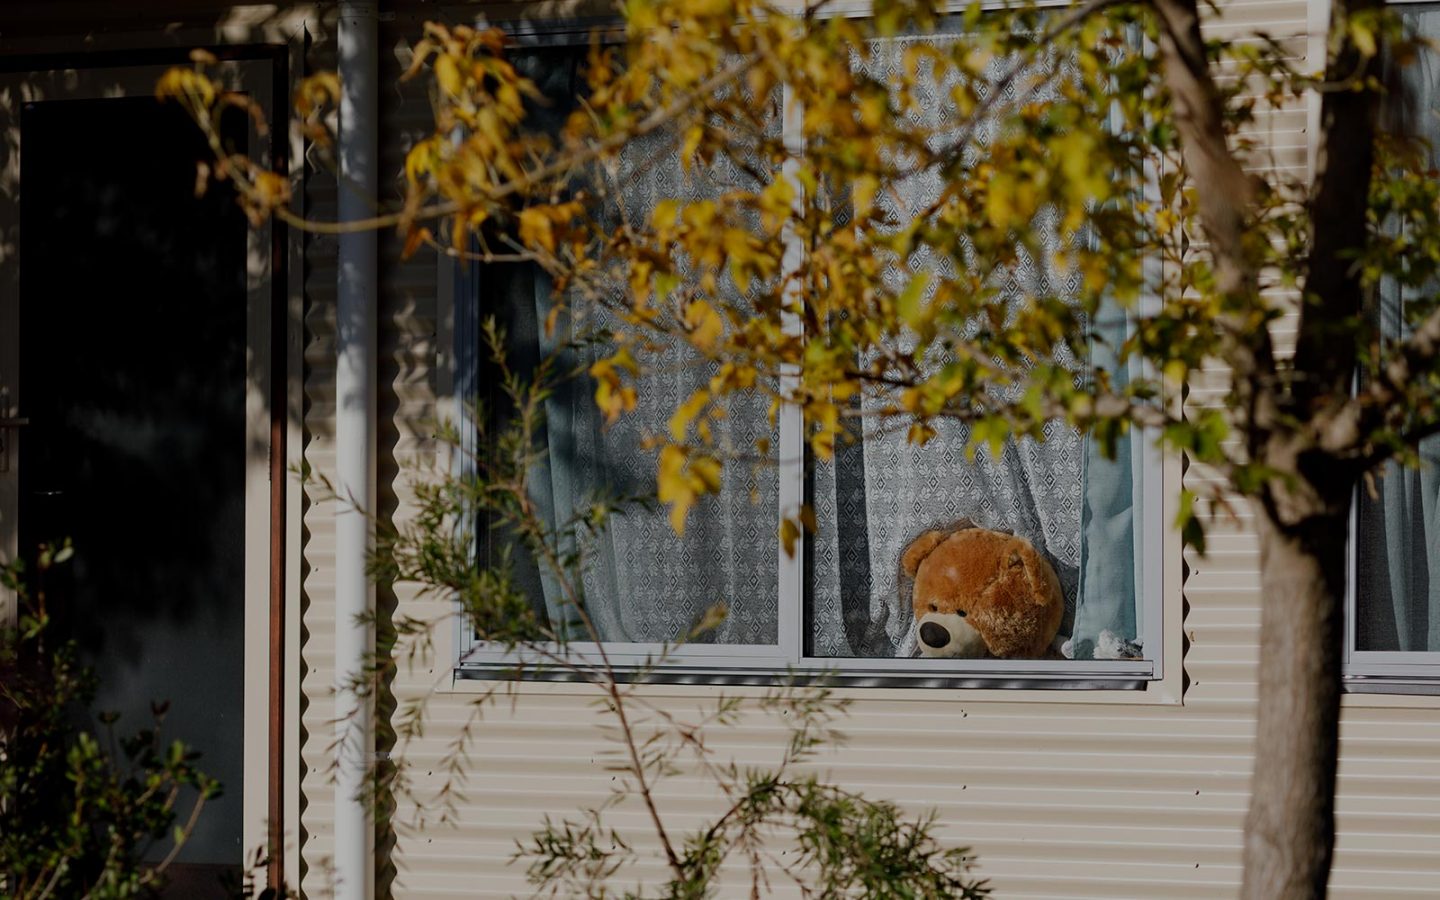 A teddy bear's head visible above the window frame in a suburban home.